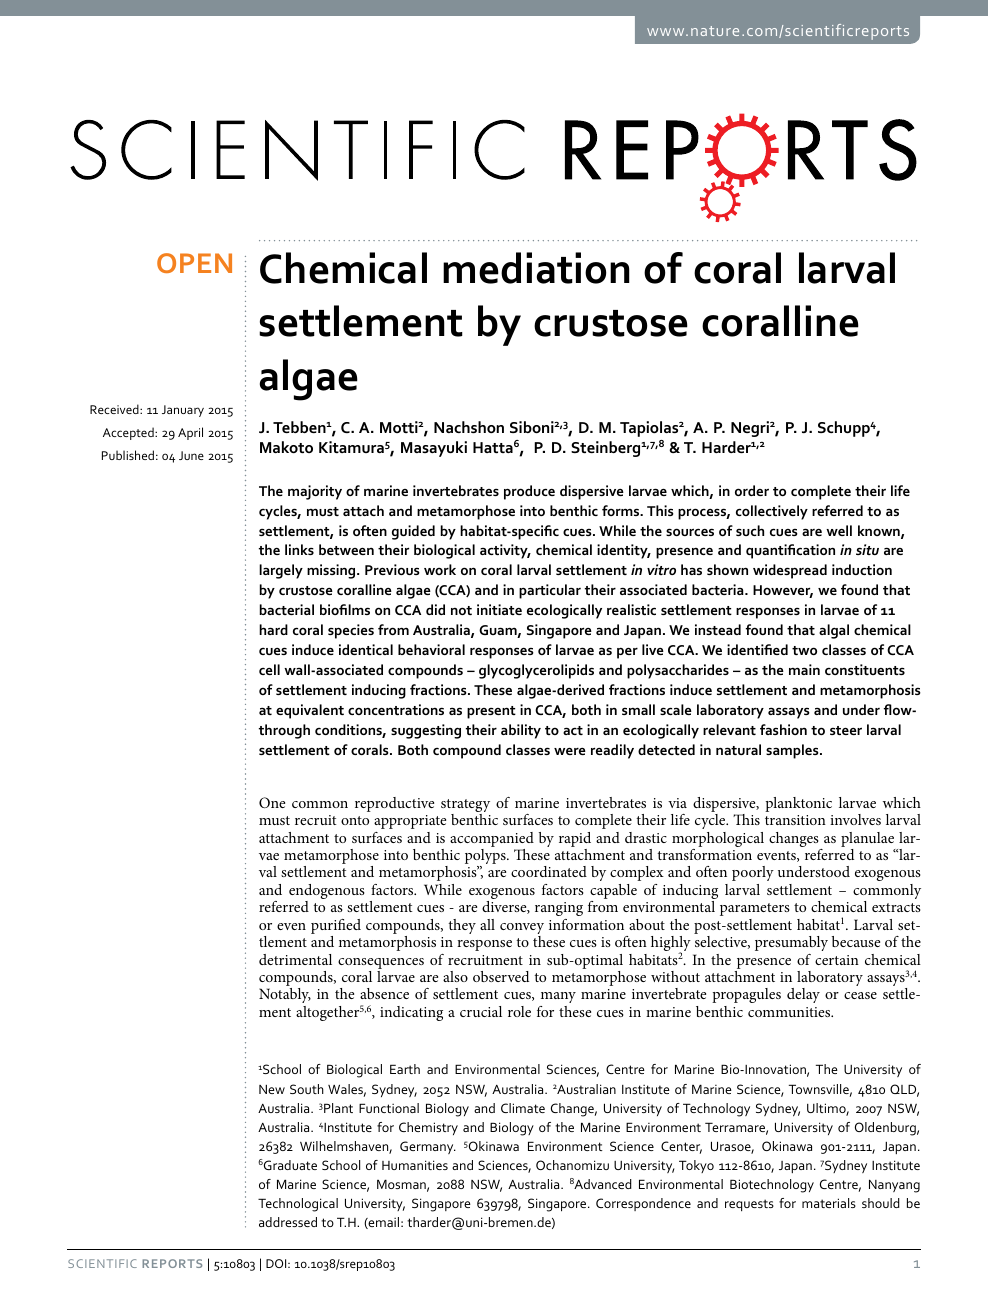 Chemical Mediation Of Coral Larval Settlement By Crustose Coralline Algae Topic Of Research Paper In Biological Sciences Download Scholarly Article Pdf And Read For Free On Cyberleninka Open Science Hub